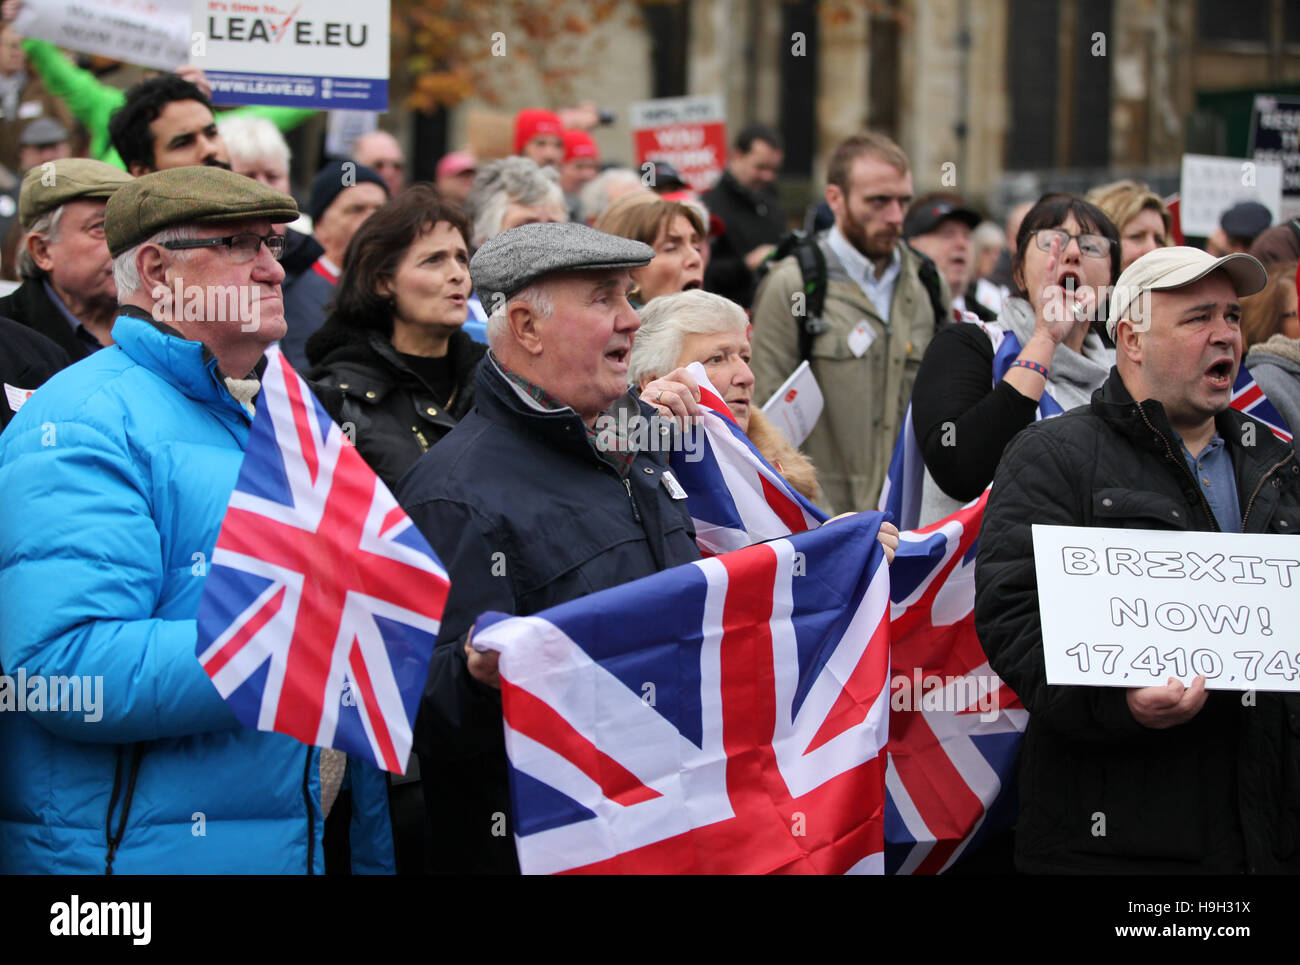 London, UK. 23rd Nov, 2016. Hundreds of Pro-Brexit campaigners demonstrate in Old Yard Palace, opposite Parliament in Westminster against the High Court ruling on Brexit, that the British Parliament must be given a say on Brexit before article 50 can be invoked. The protest was timed to coincide with Chancellor Philip Hammond’s Autumn Statement, with organisers claiming “the world’s media will be covering the event, giving the 52% [who voted for Brexit] maximum exposure to make their voices heard”. Credit:  Dinendra Haria/Alamy Live News Stock Photo